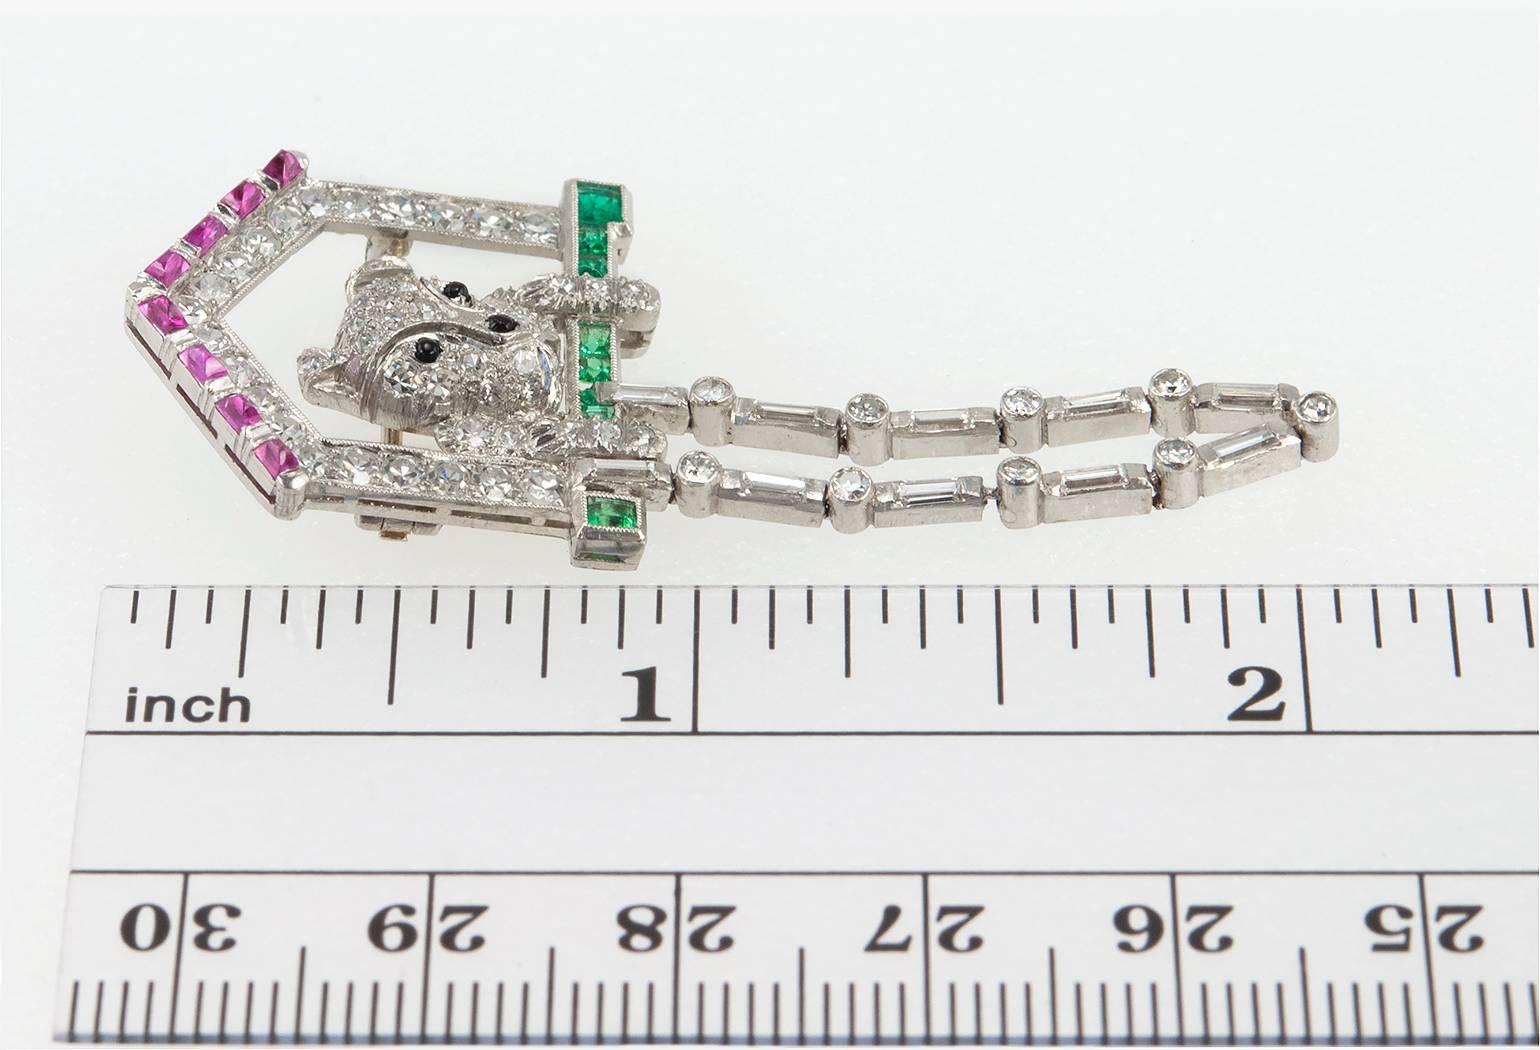 
An adorable dog in a doghouse brooch!  This whimsical platinum brooch features a diamond dog in a doghouse with emeralds and rubies on a diamond leash with approximately 2 carats in total diamond weight.  Circa 1930s.

The brooch measures